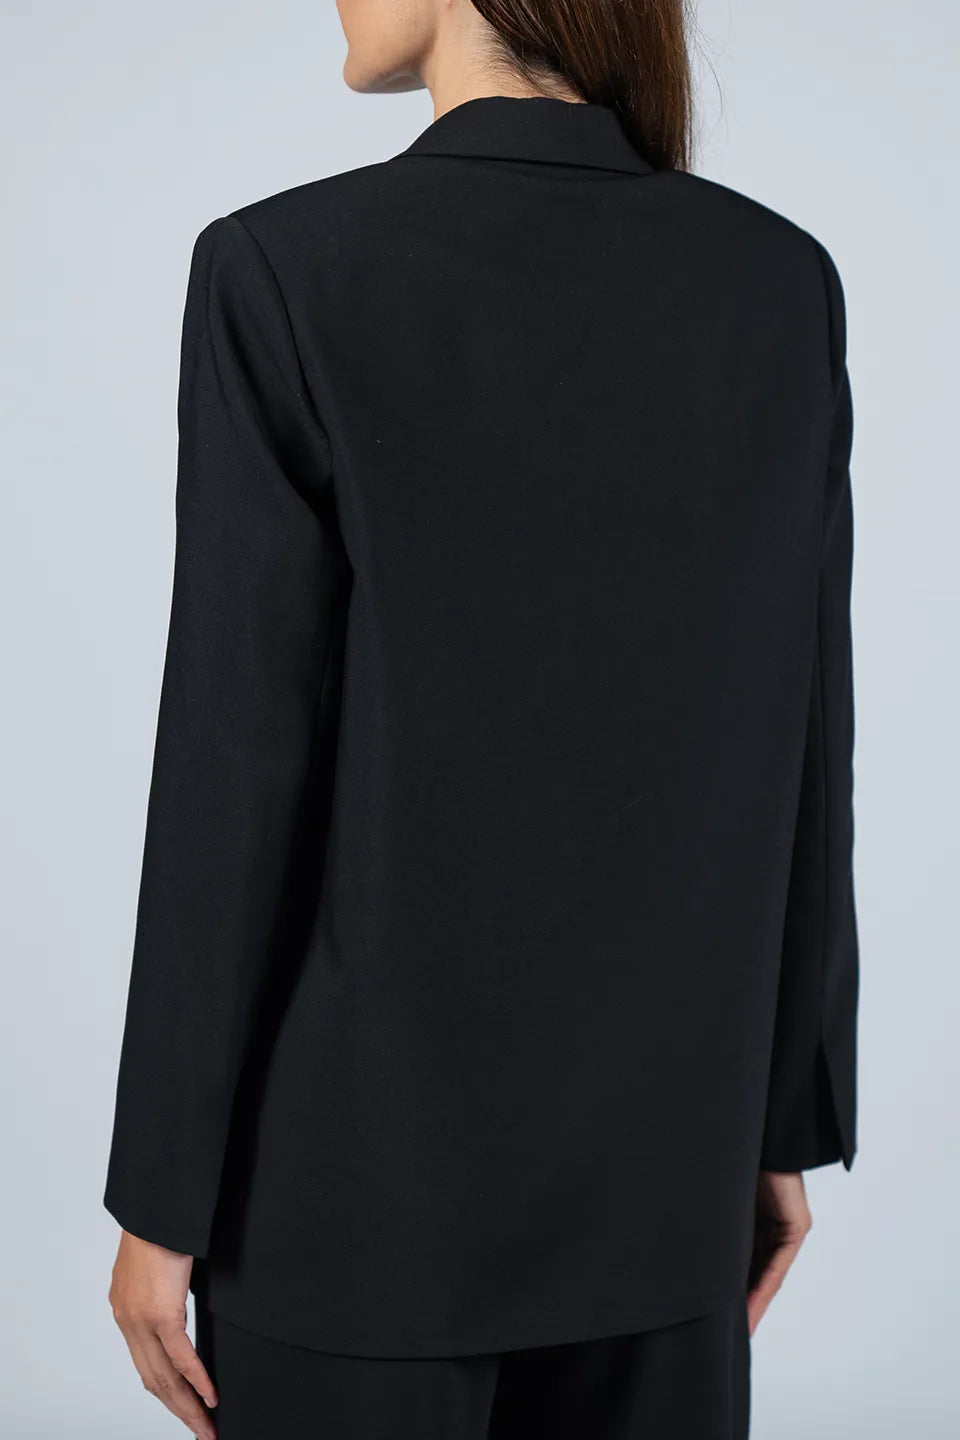 Designer Black Women blazers, Jacket, shop online with free delivery in UAE. Product gallery 4